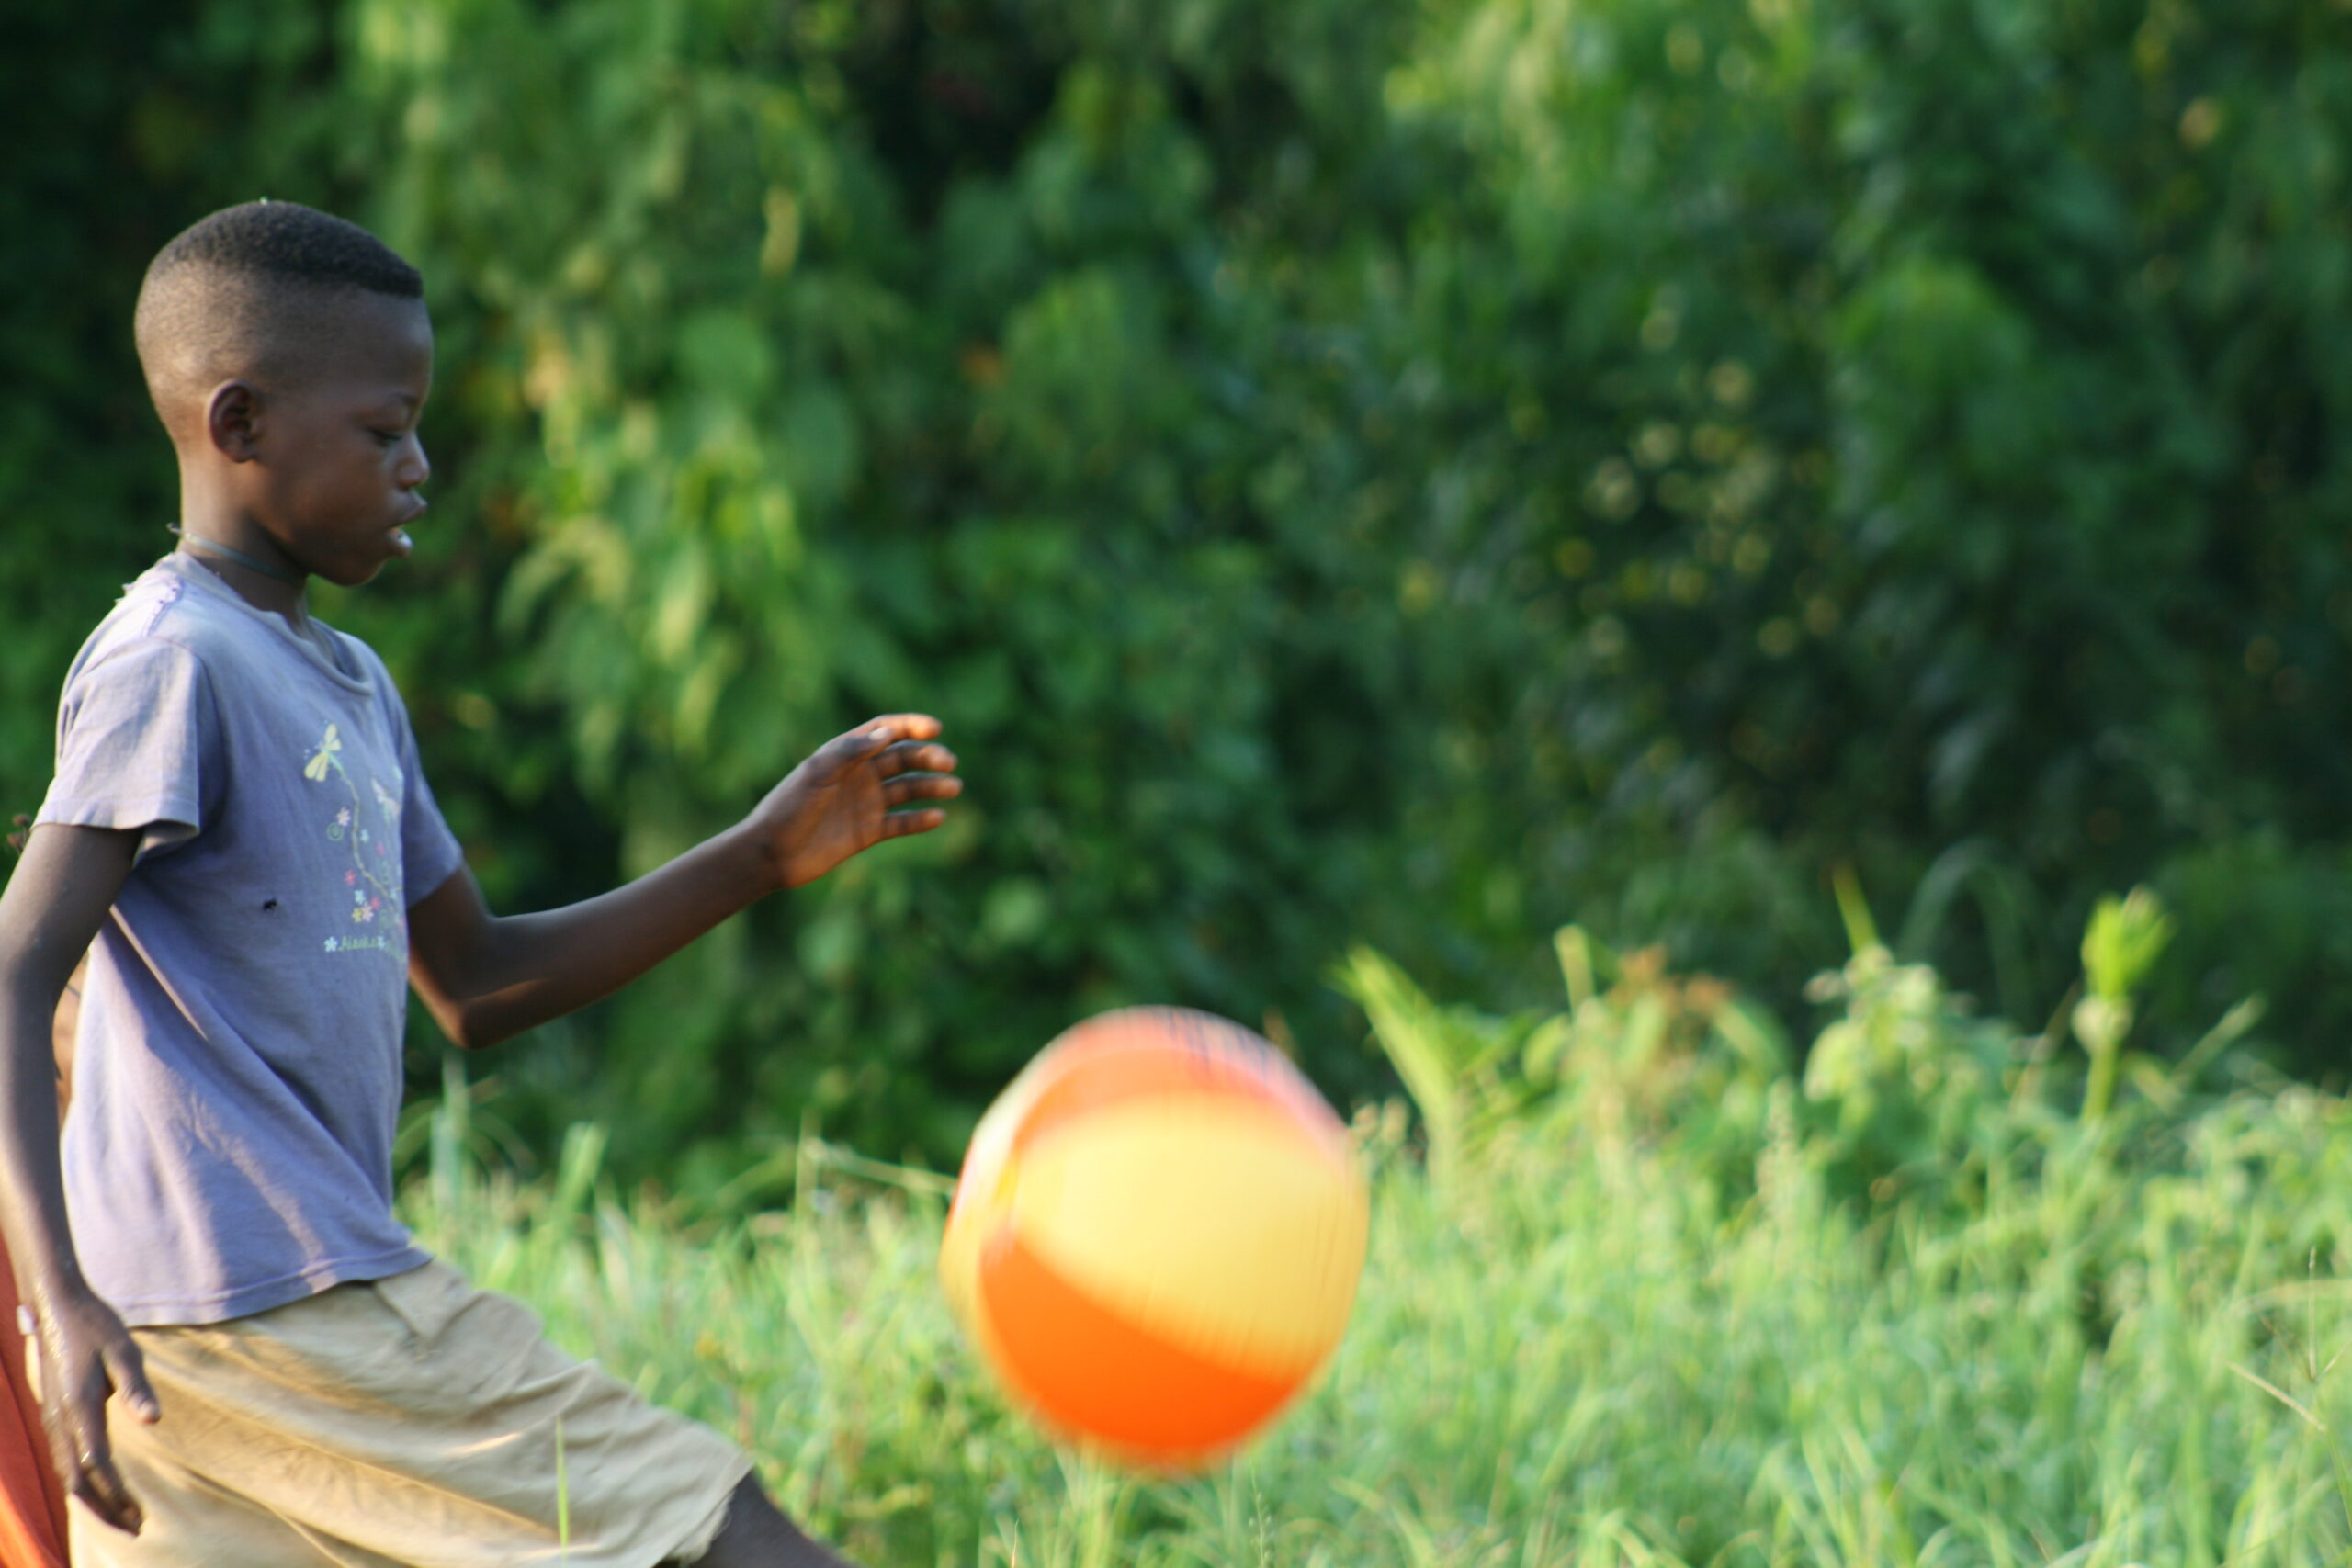 Child playing with ball in Malonbolombo village